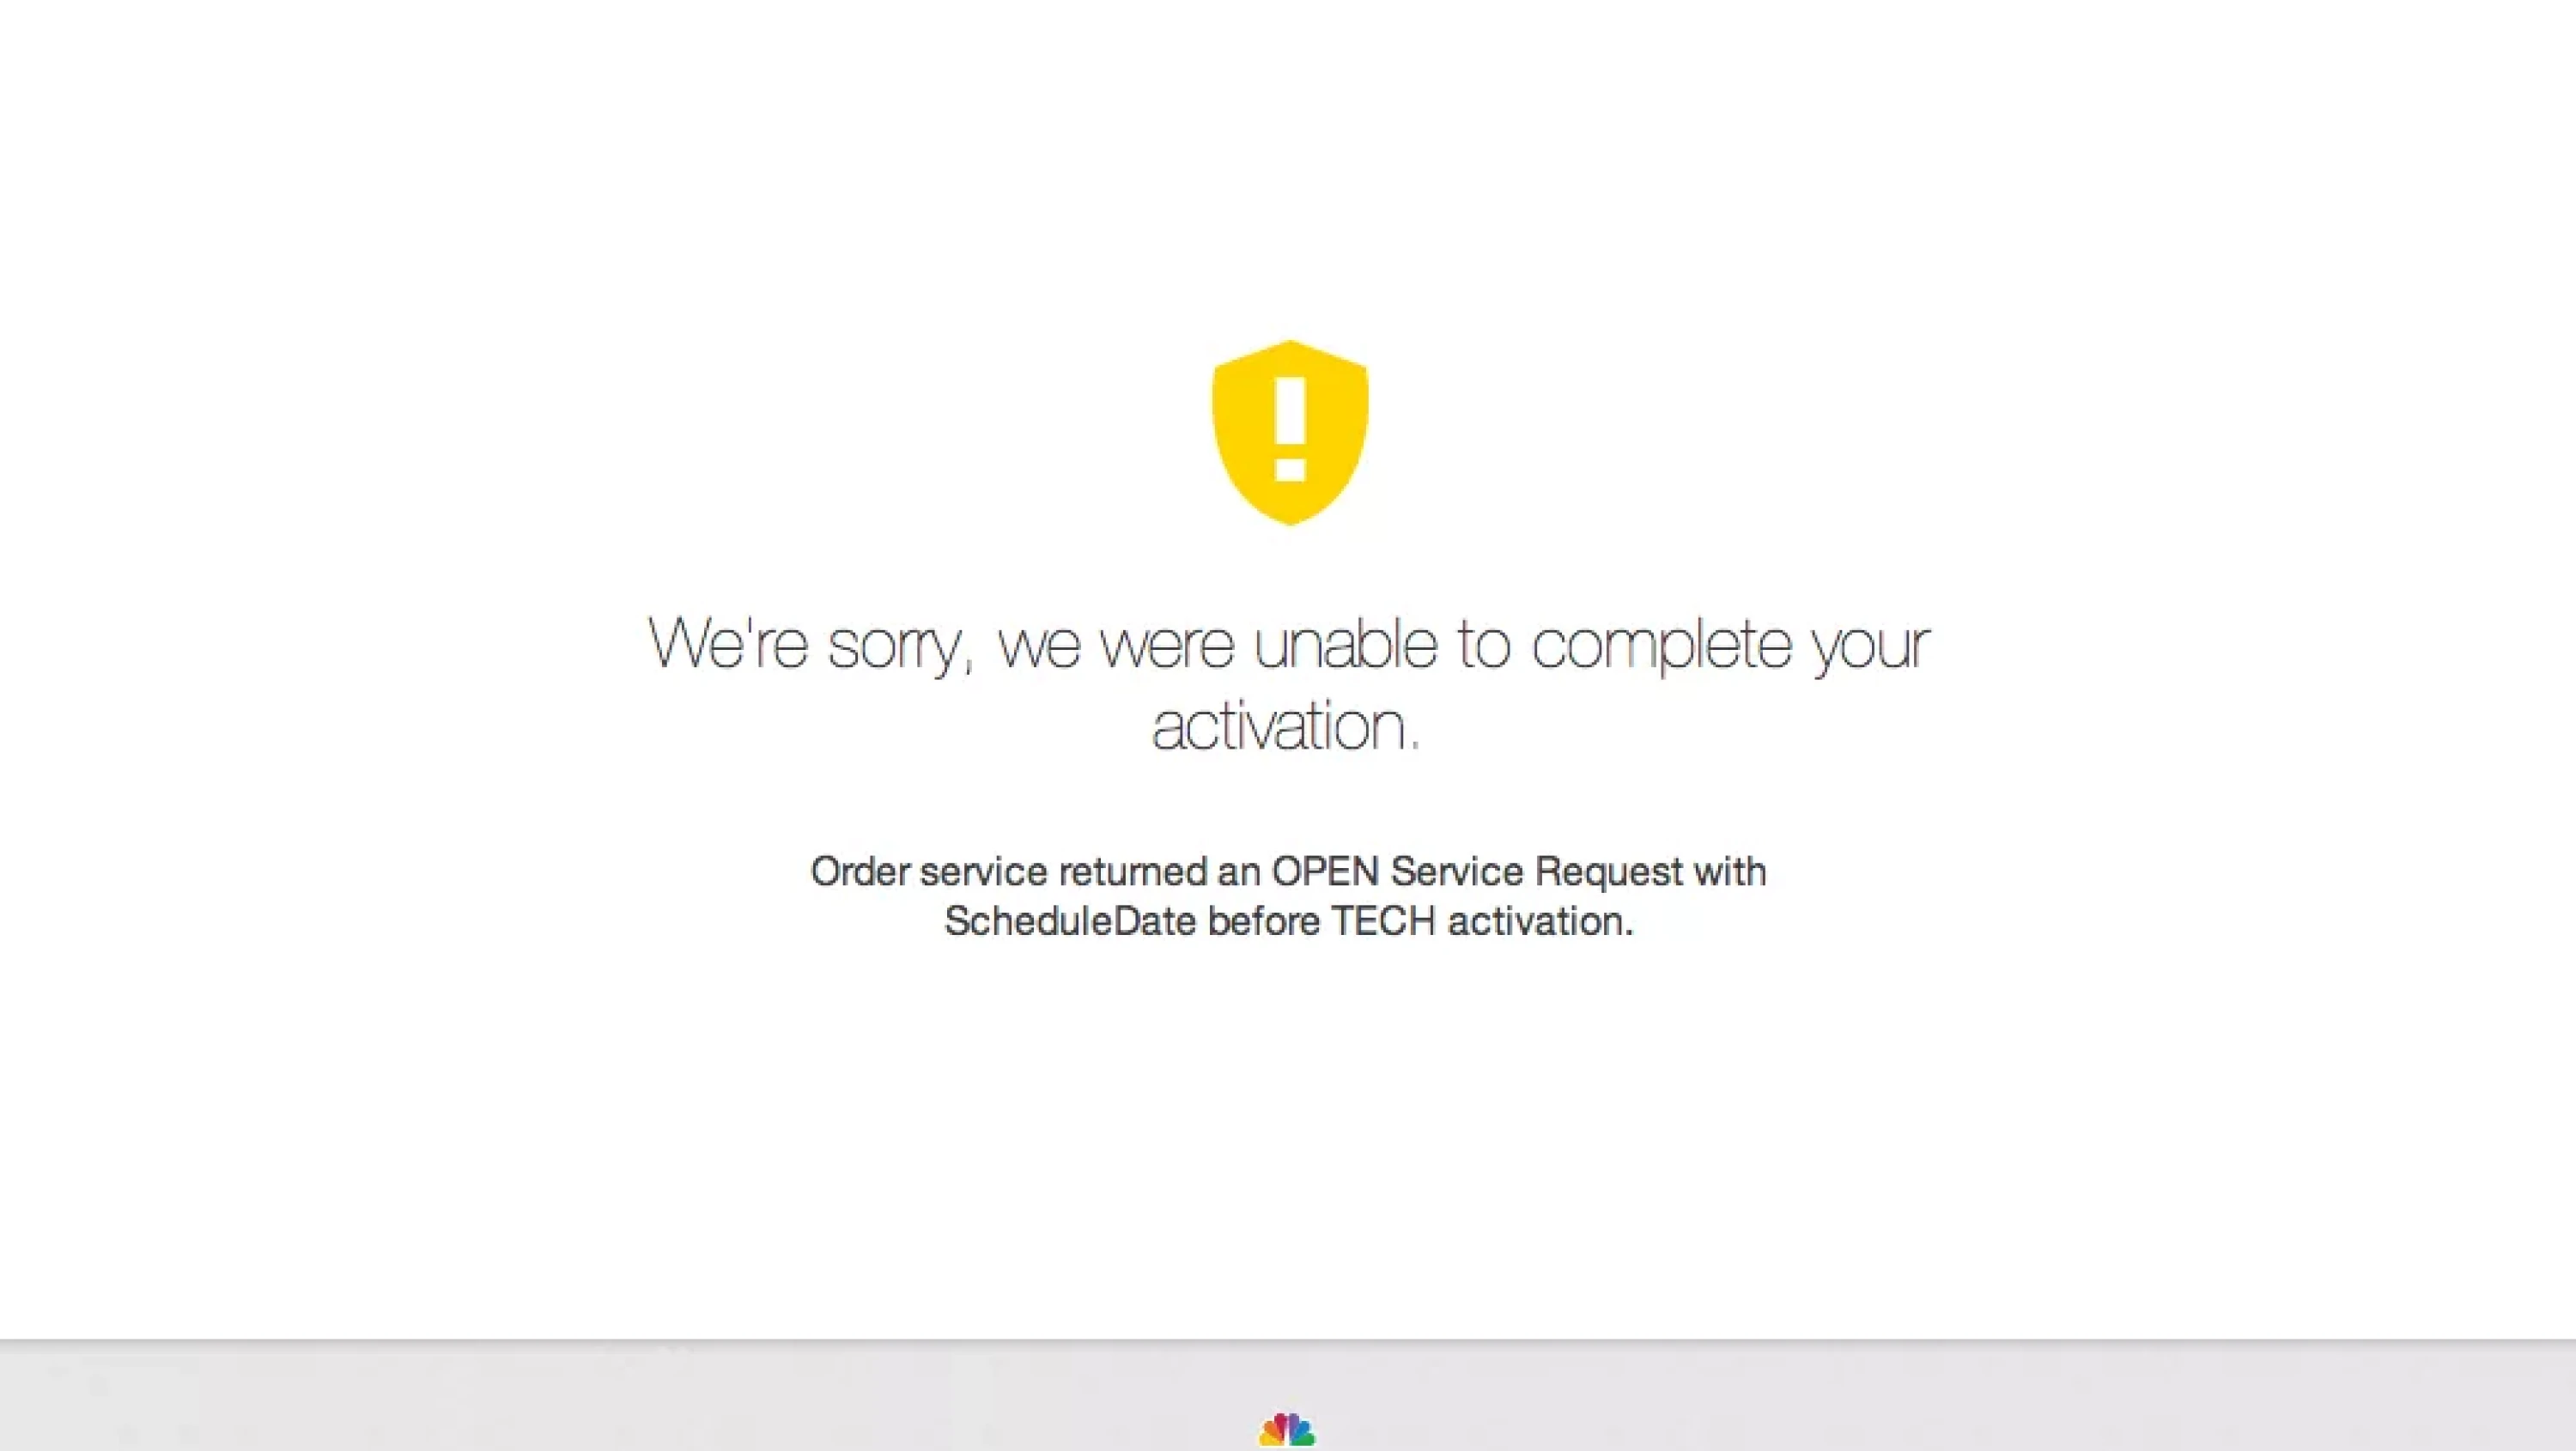 We’re sorry, we were unable to complete your activation. Order service returned an OPEN Service Request with ScheduleDate before TECH activation.